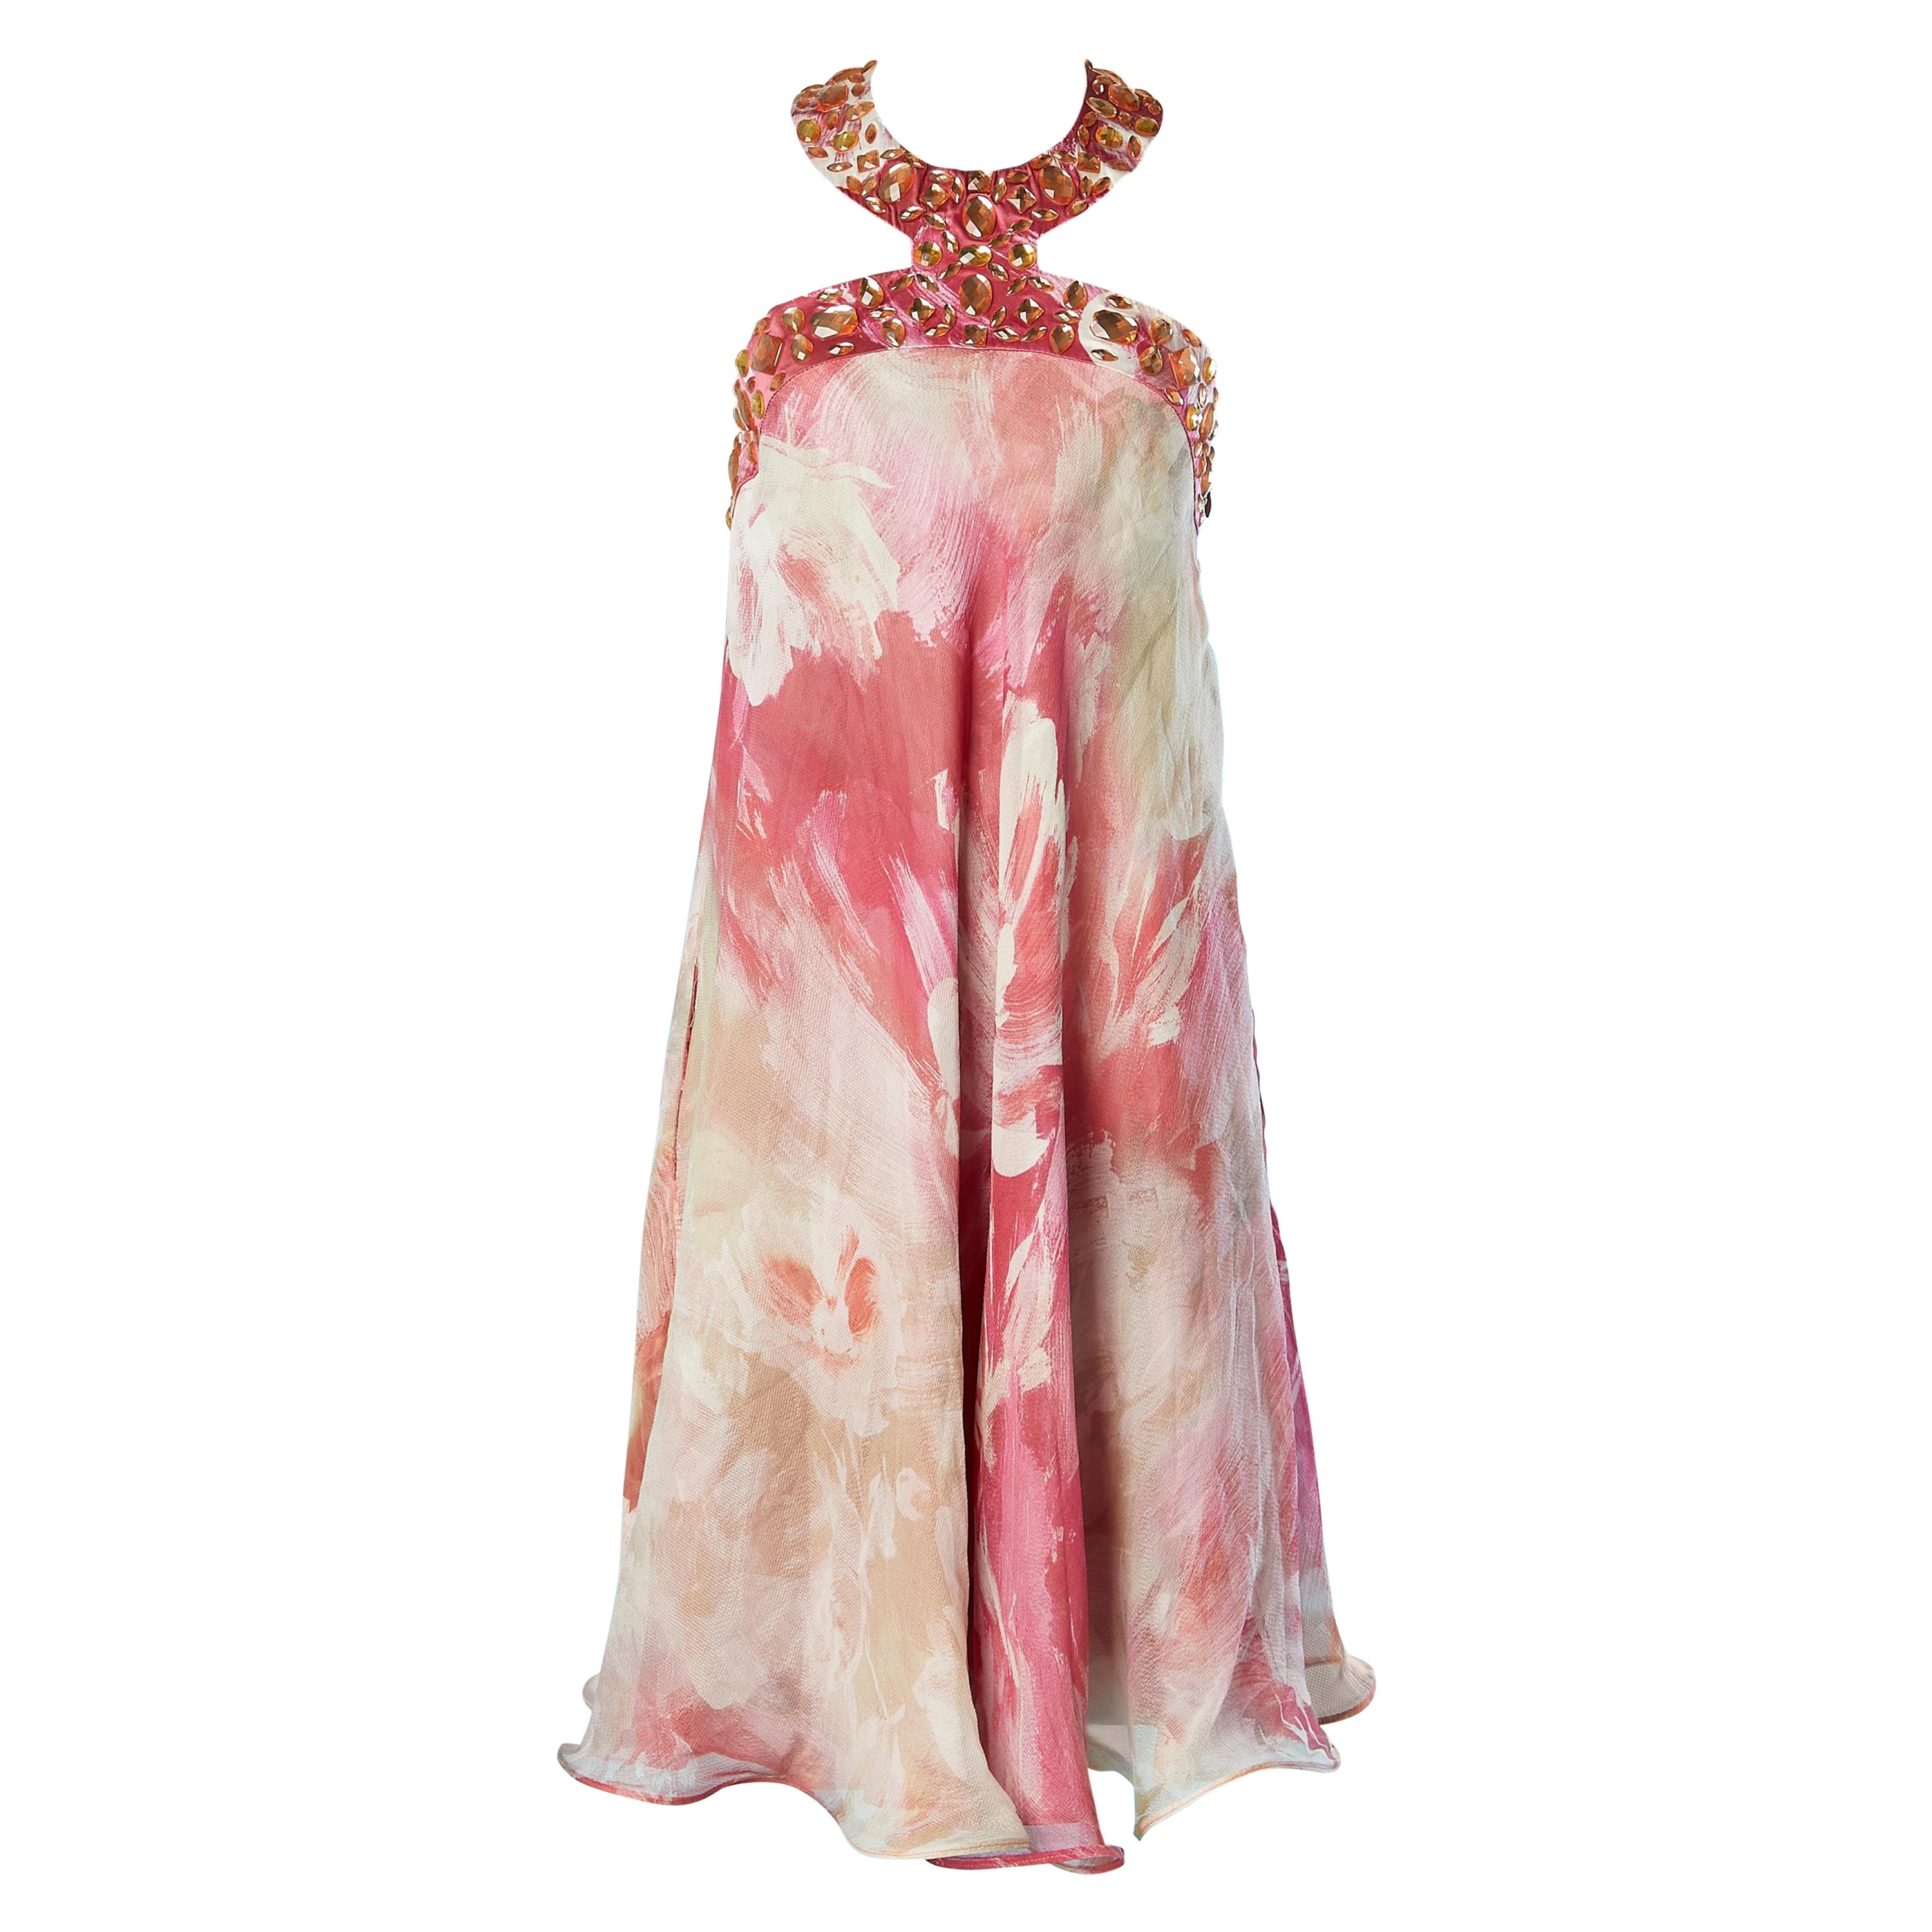 Backless cocktail dress in printed chiffon and rhinestone neckless Jiki 